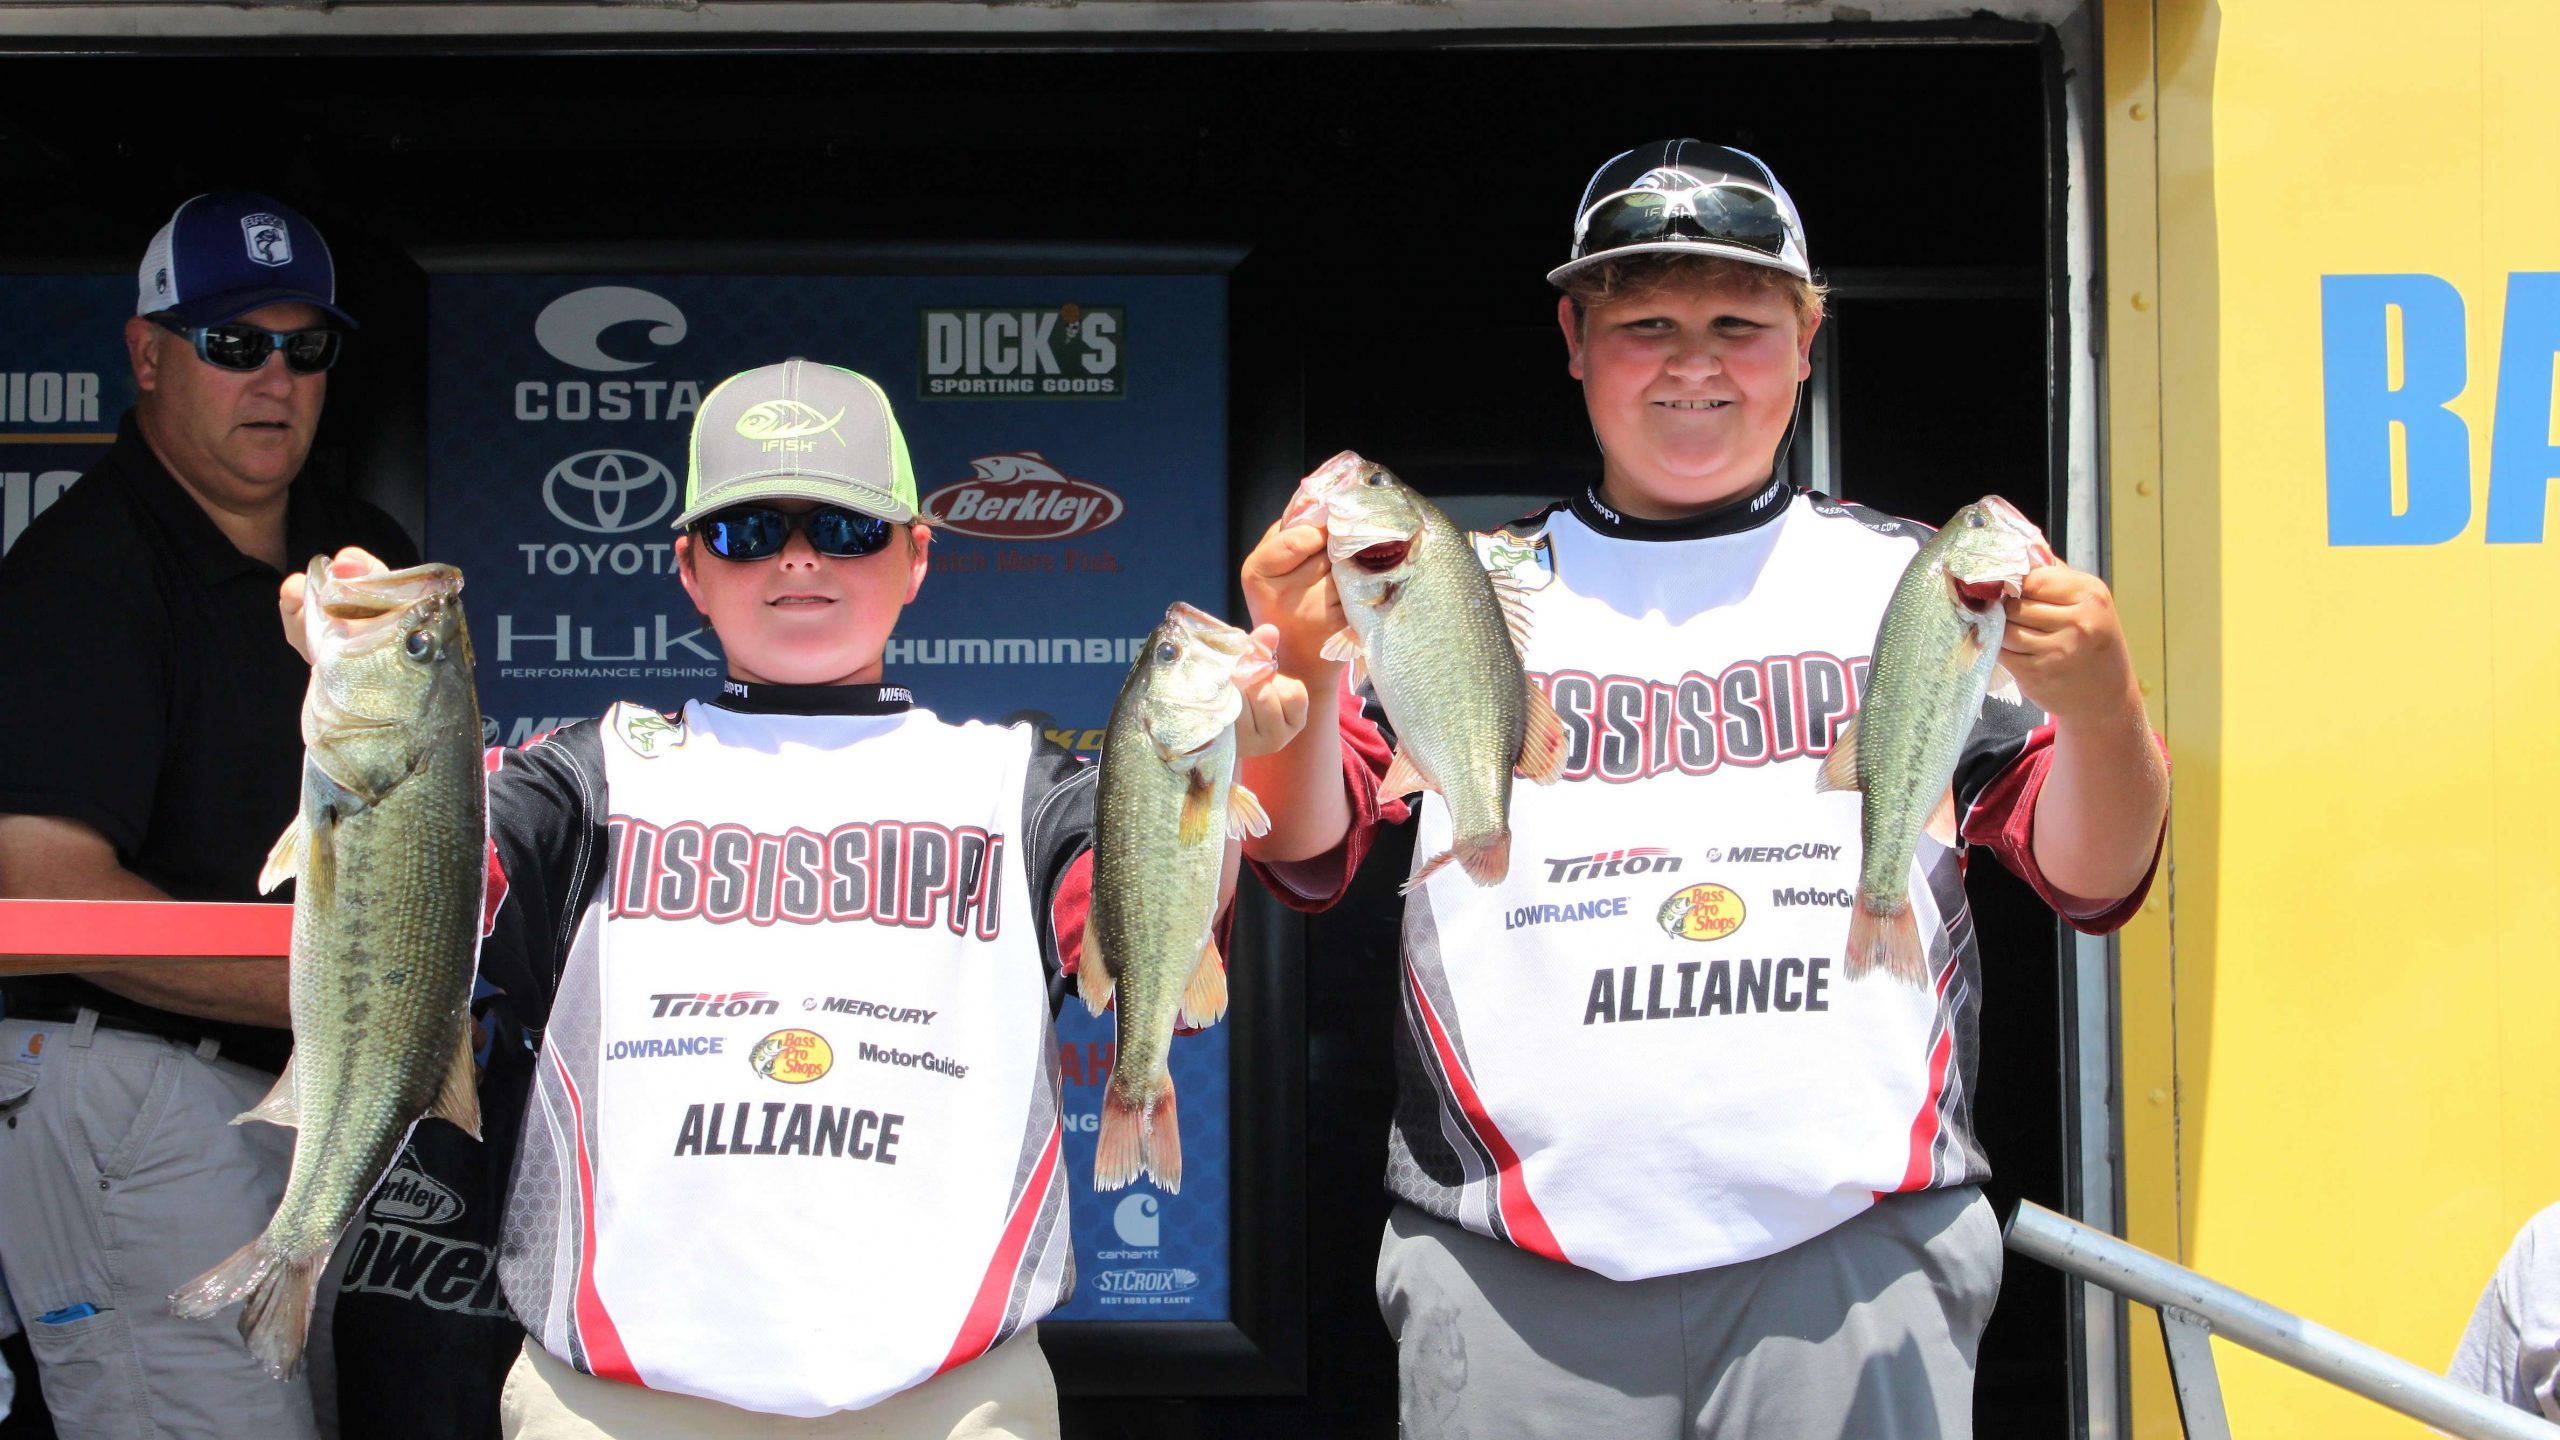 Bradlee Parish and Tyler Guin of Mississippi are in third place with 9-15. They had a limit on Day 1, which split a tie-breaker with Carrier and Lafrance to put them in the Top 3 heading into the final day of fishing.
